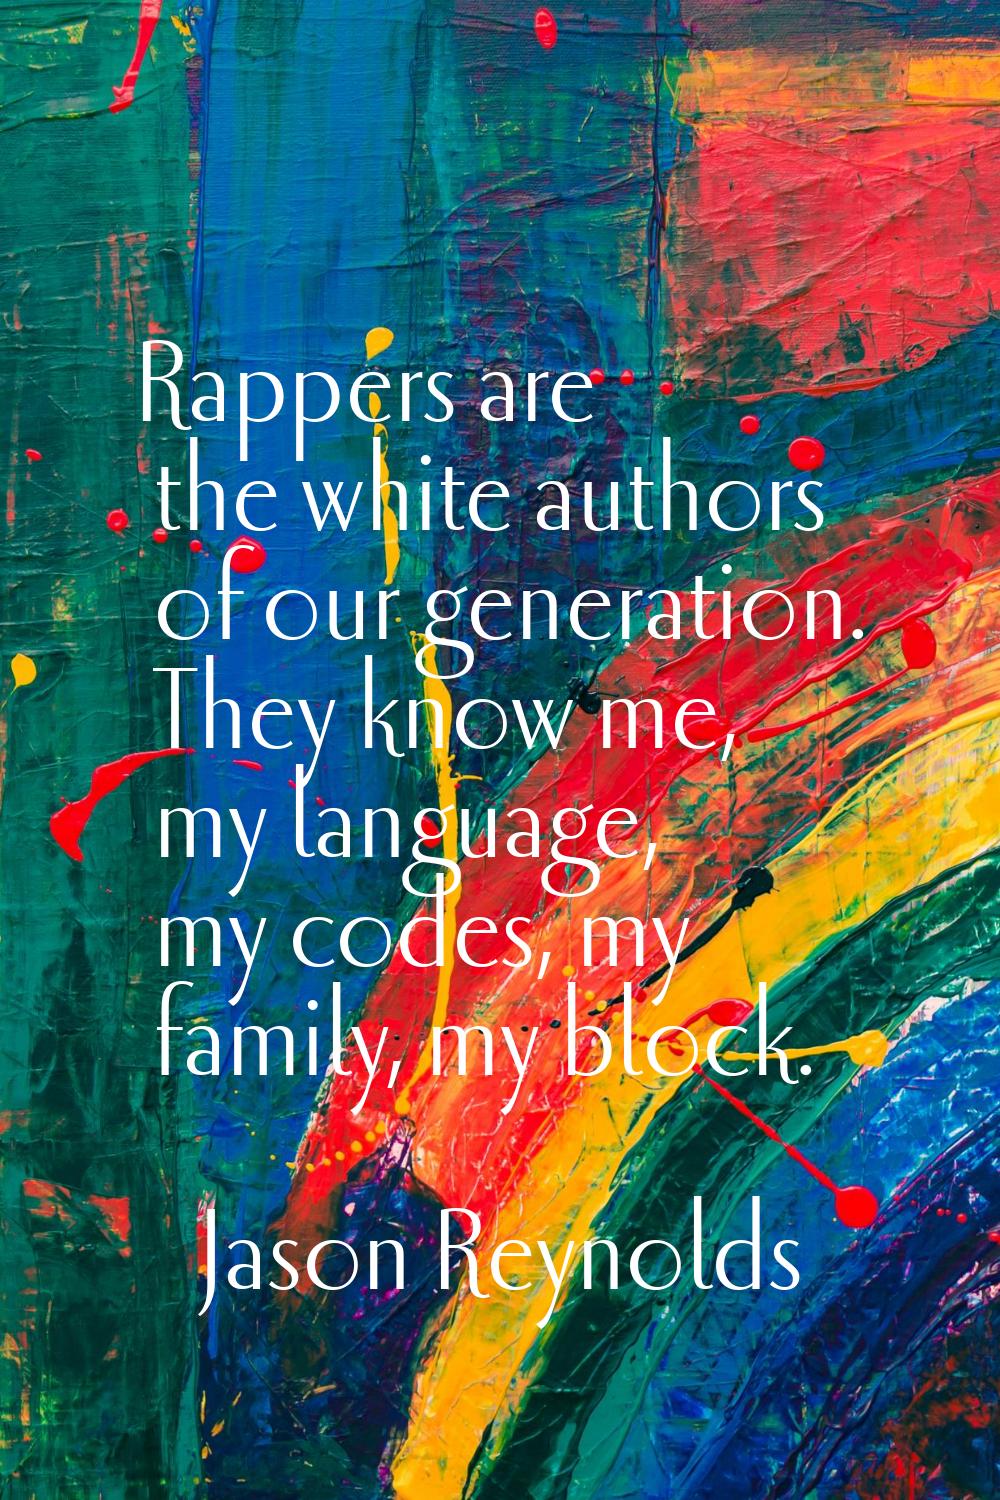 Rappers are the white authors of our generation. They know me, my language, my codes, my family, my